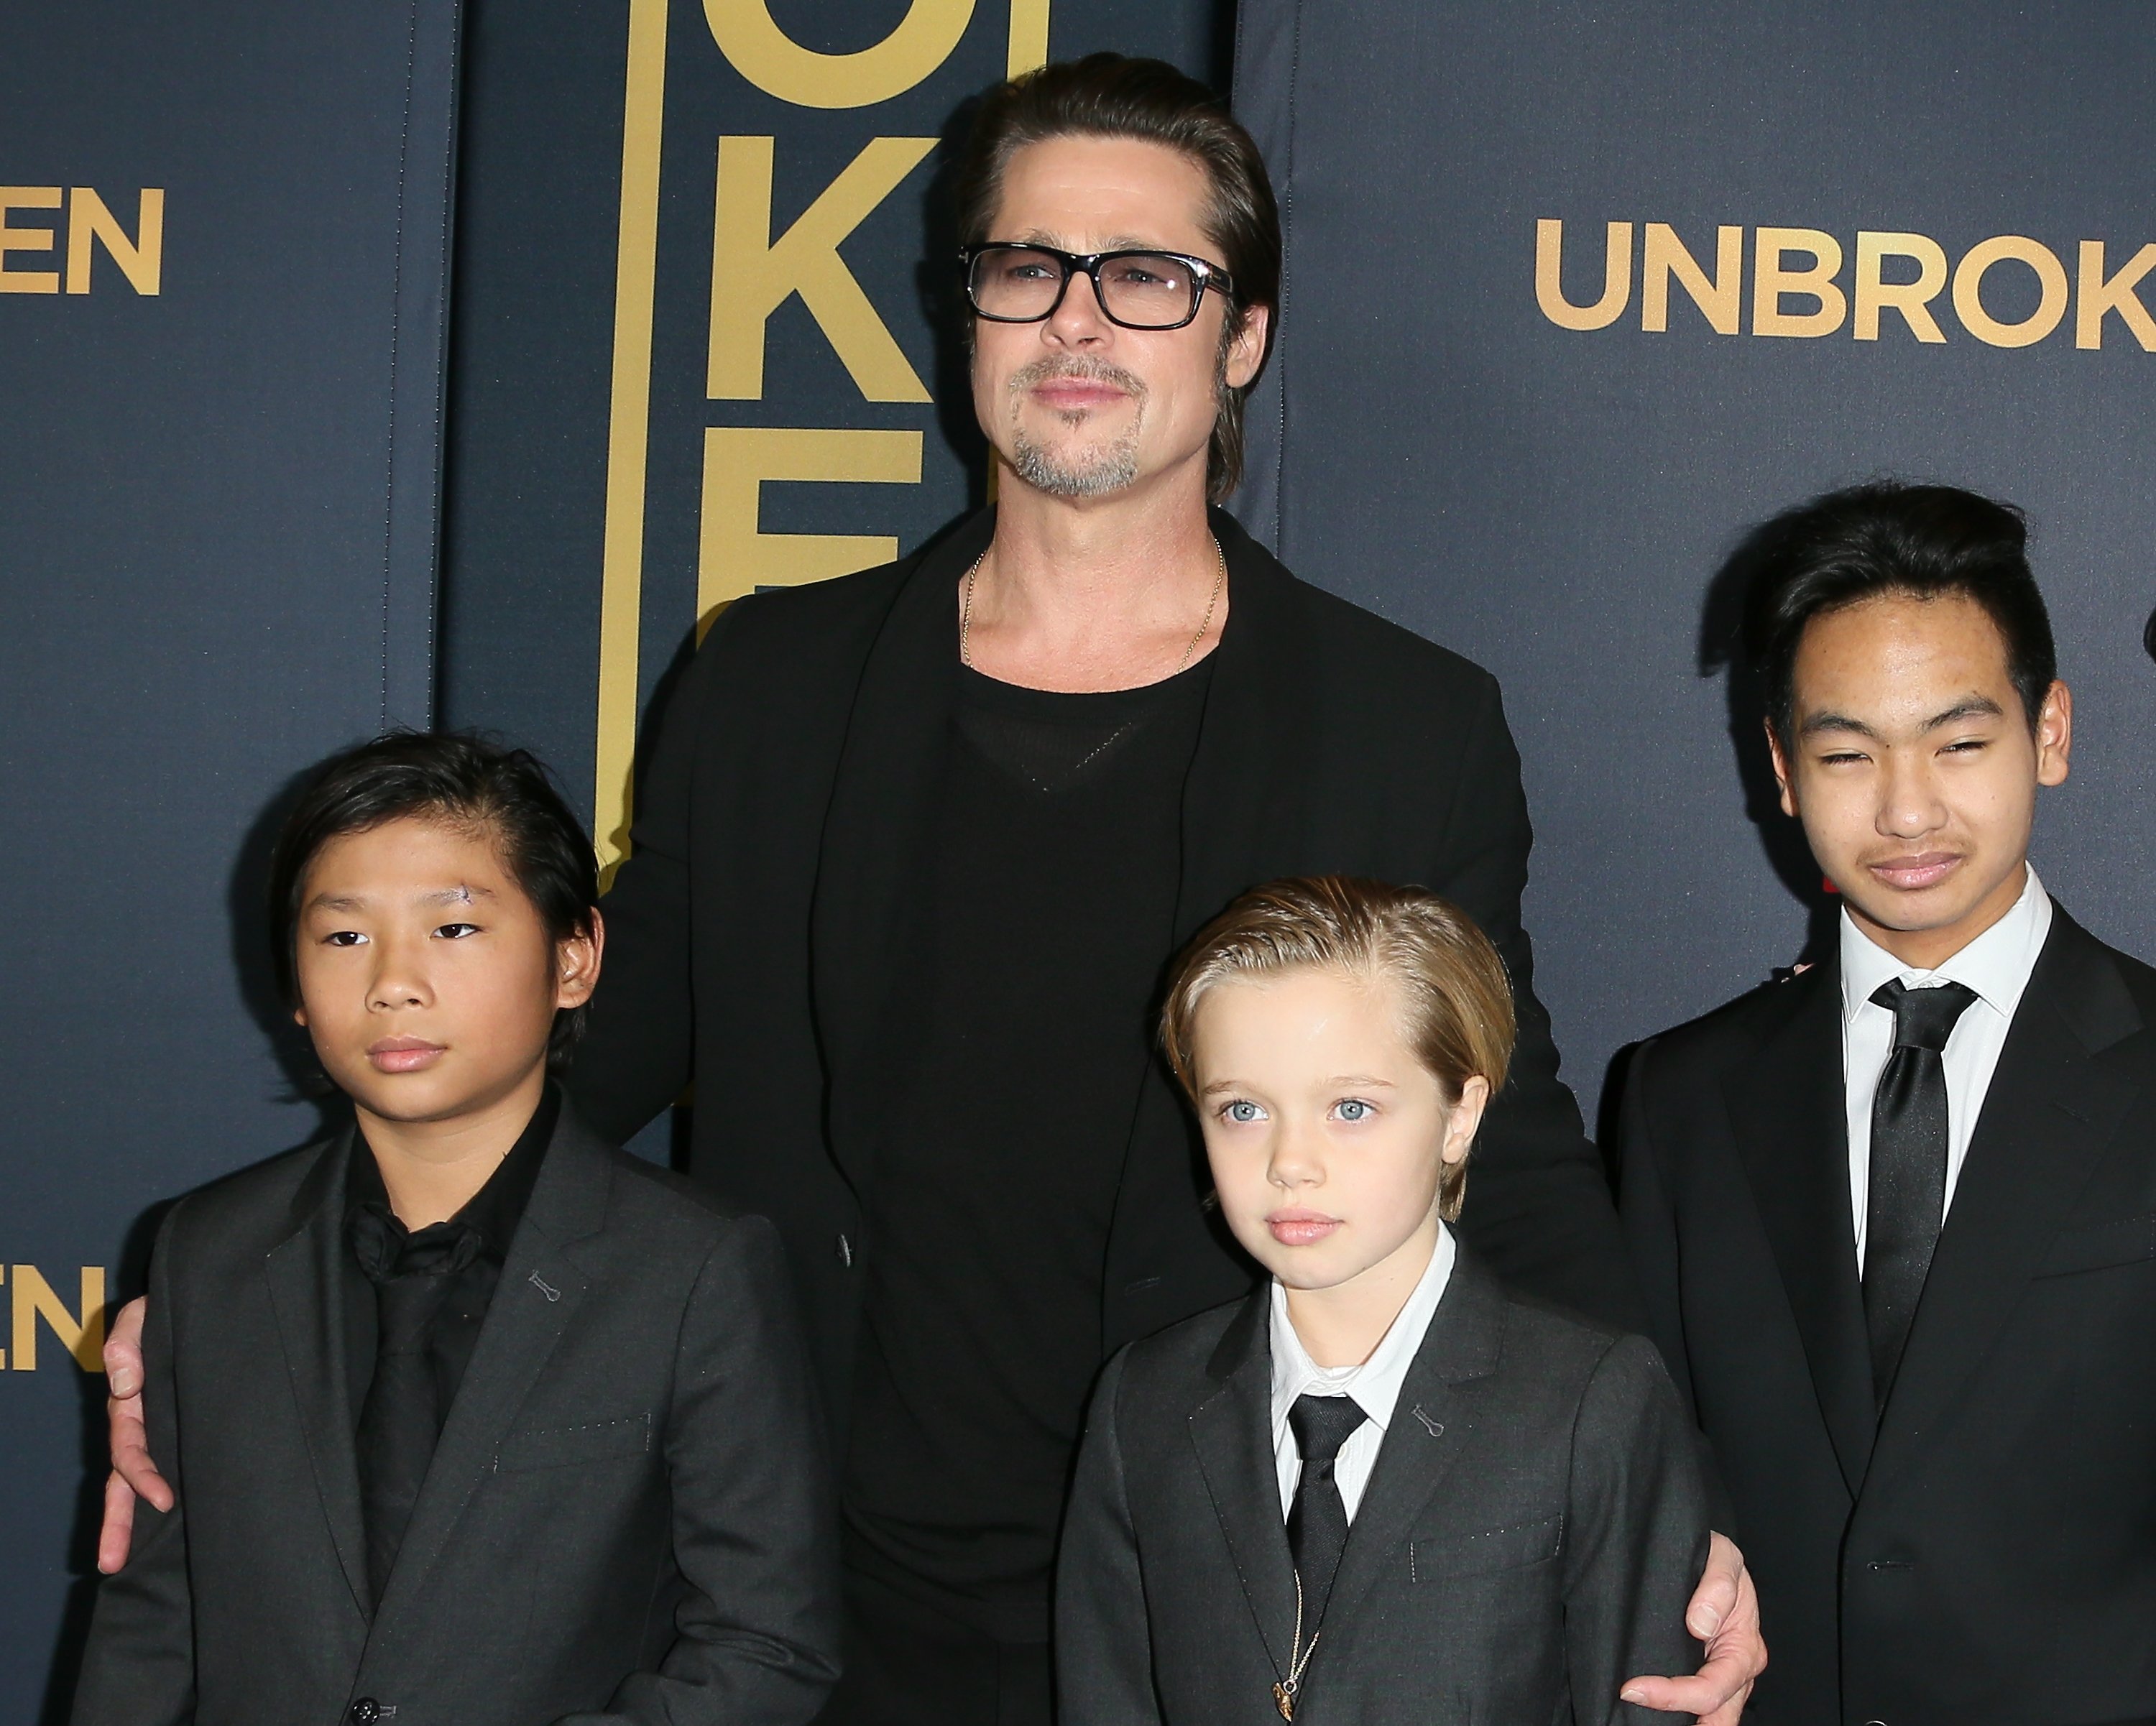 Brad Pitt, Pax Thien Jolie-Pitt, Shiloh Nouvel Jolie-Pitt and Maddox Jolie-Pitt attend the "Unbroken" Los Angeles premiere held at the TCL Chinese Theatre IMAX on December 15, 2014 in Hollywood, California. | Source: Getty Images